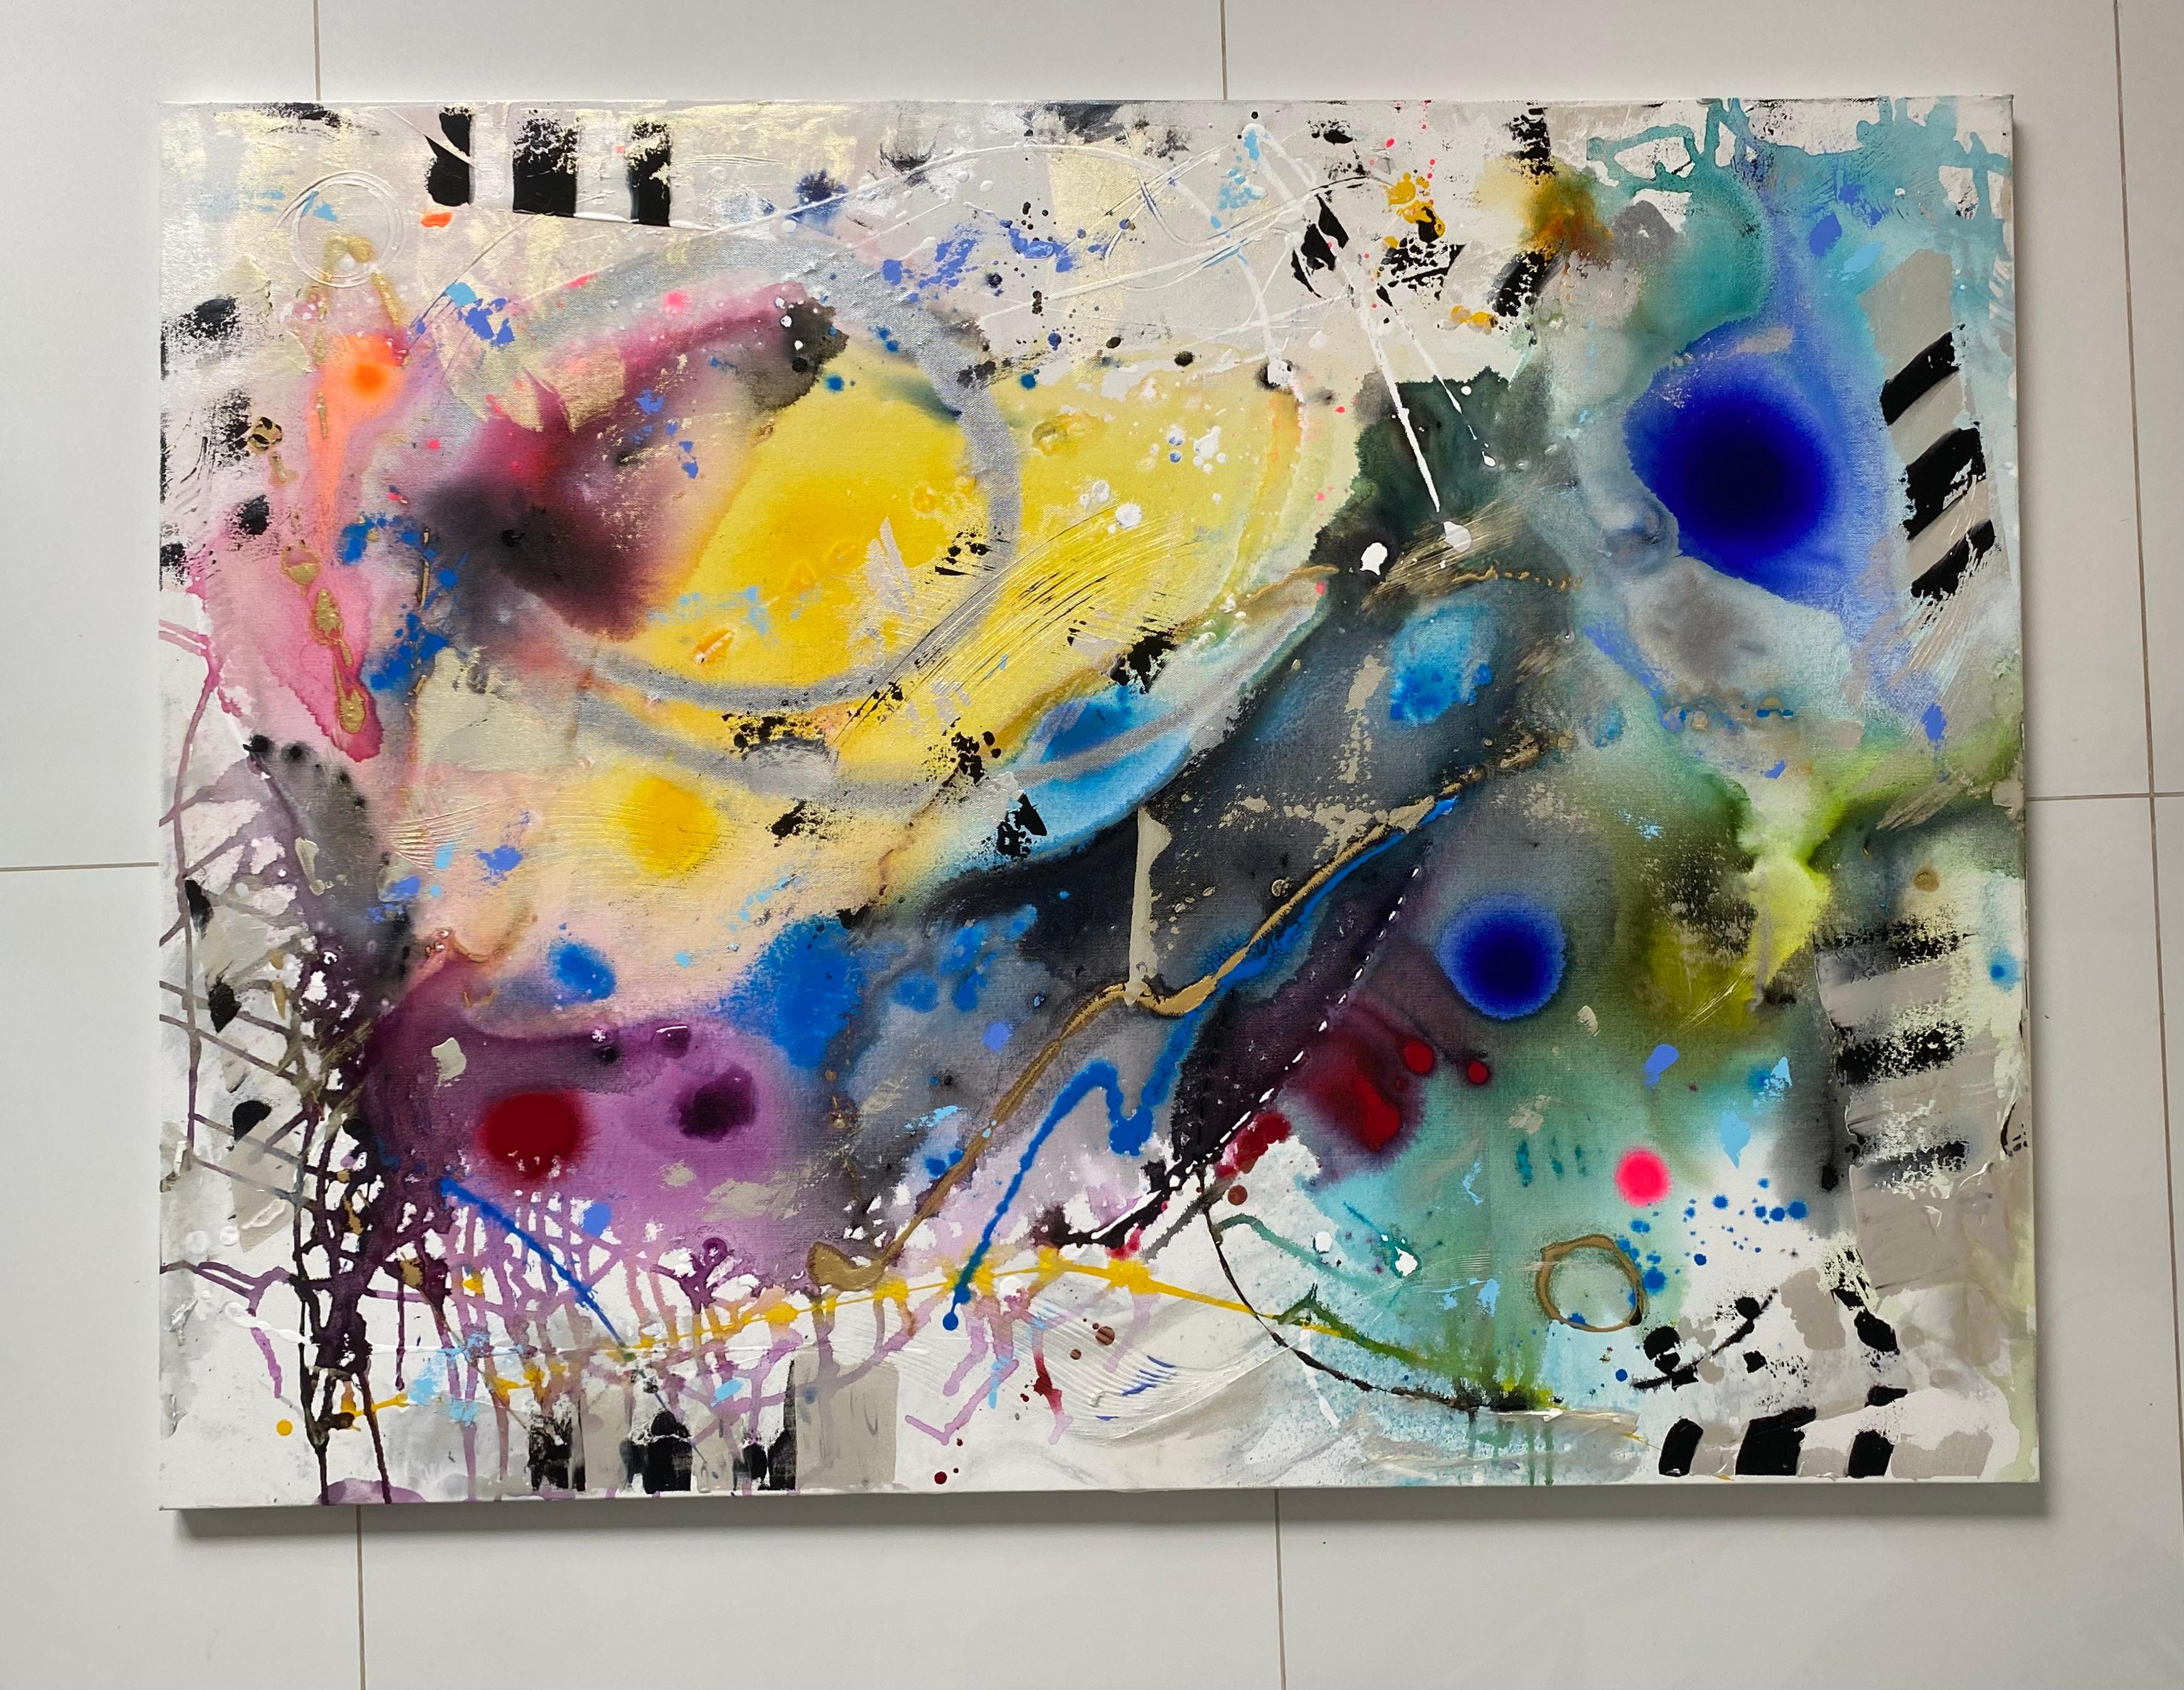 Contemporary Abstract Painting on Canvas by Tyler Murphy

 Offered for sale is a colorful contemporary abstract painting on canvas by Tyler Murphy. The painting is signed in the lower right. It is displayed in a white lacquered frame and wired to